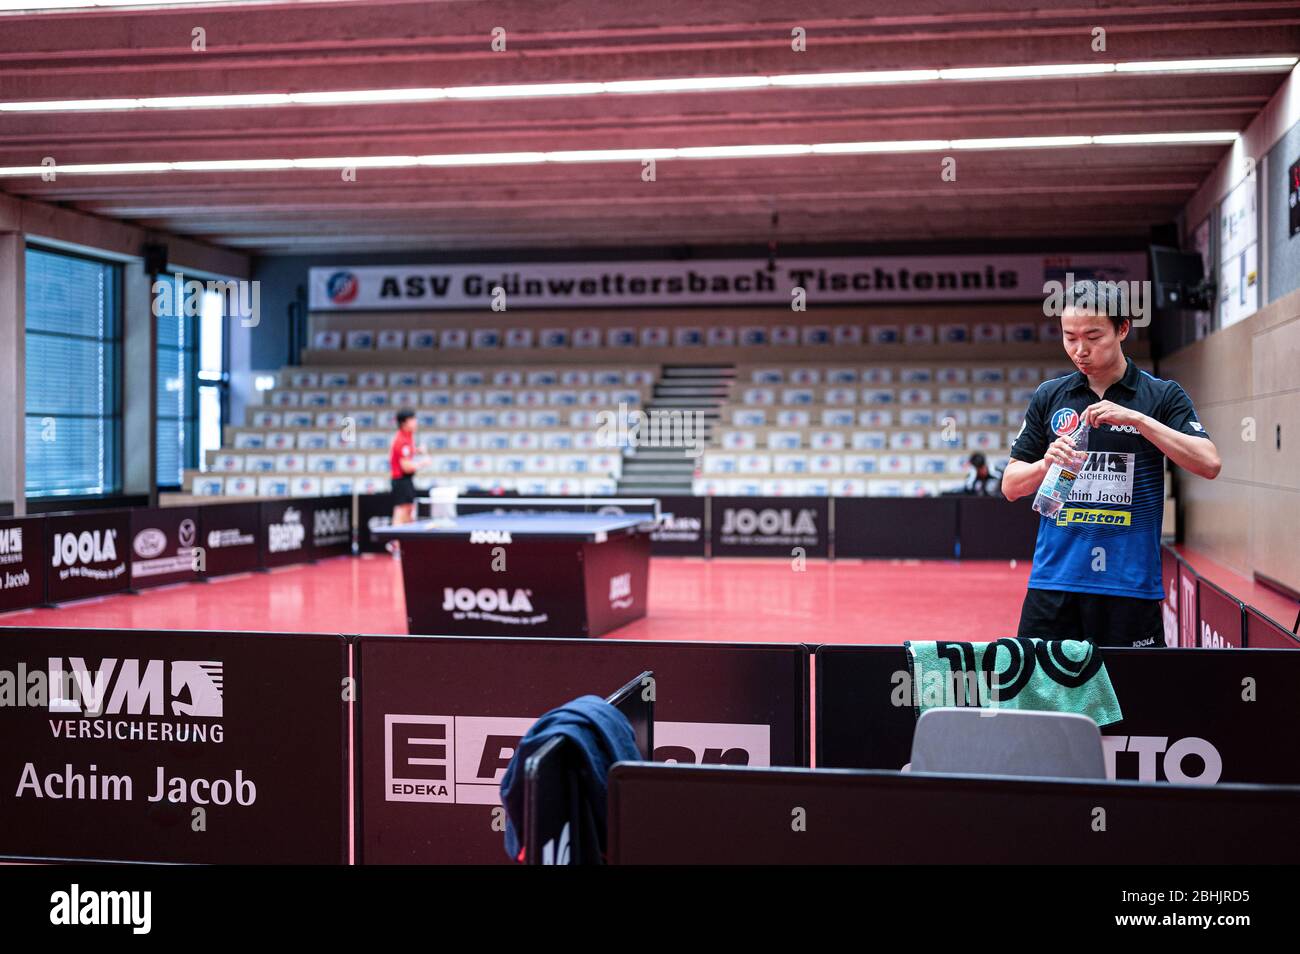 Xi Wang (r./ASV Gruenwettersbach) drinks. In the background there are  cardboard stands on the empty stands instead of the spectators. GES/table  tennis/1. Bundesliga: In times of the Corona crisis, the table tennis